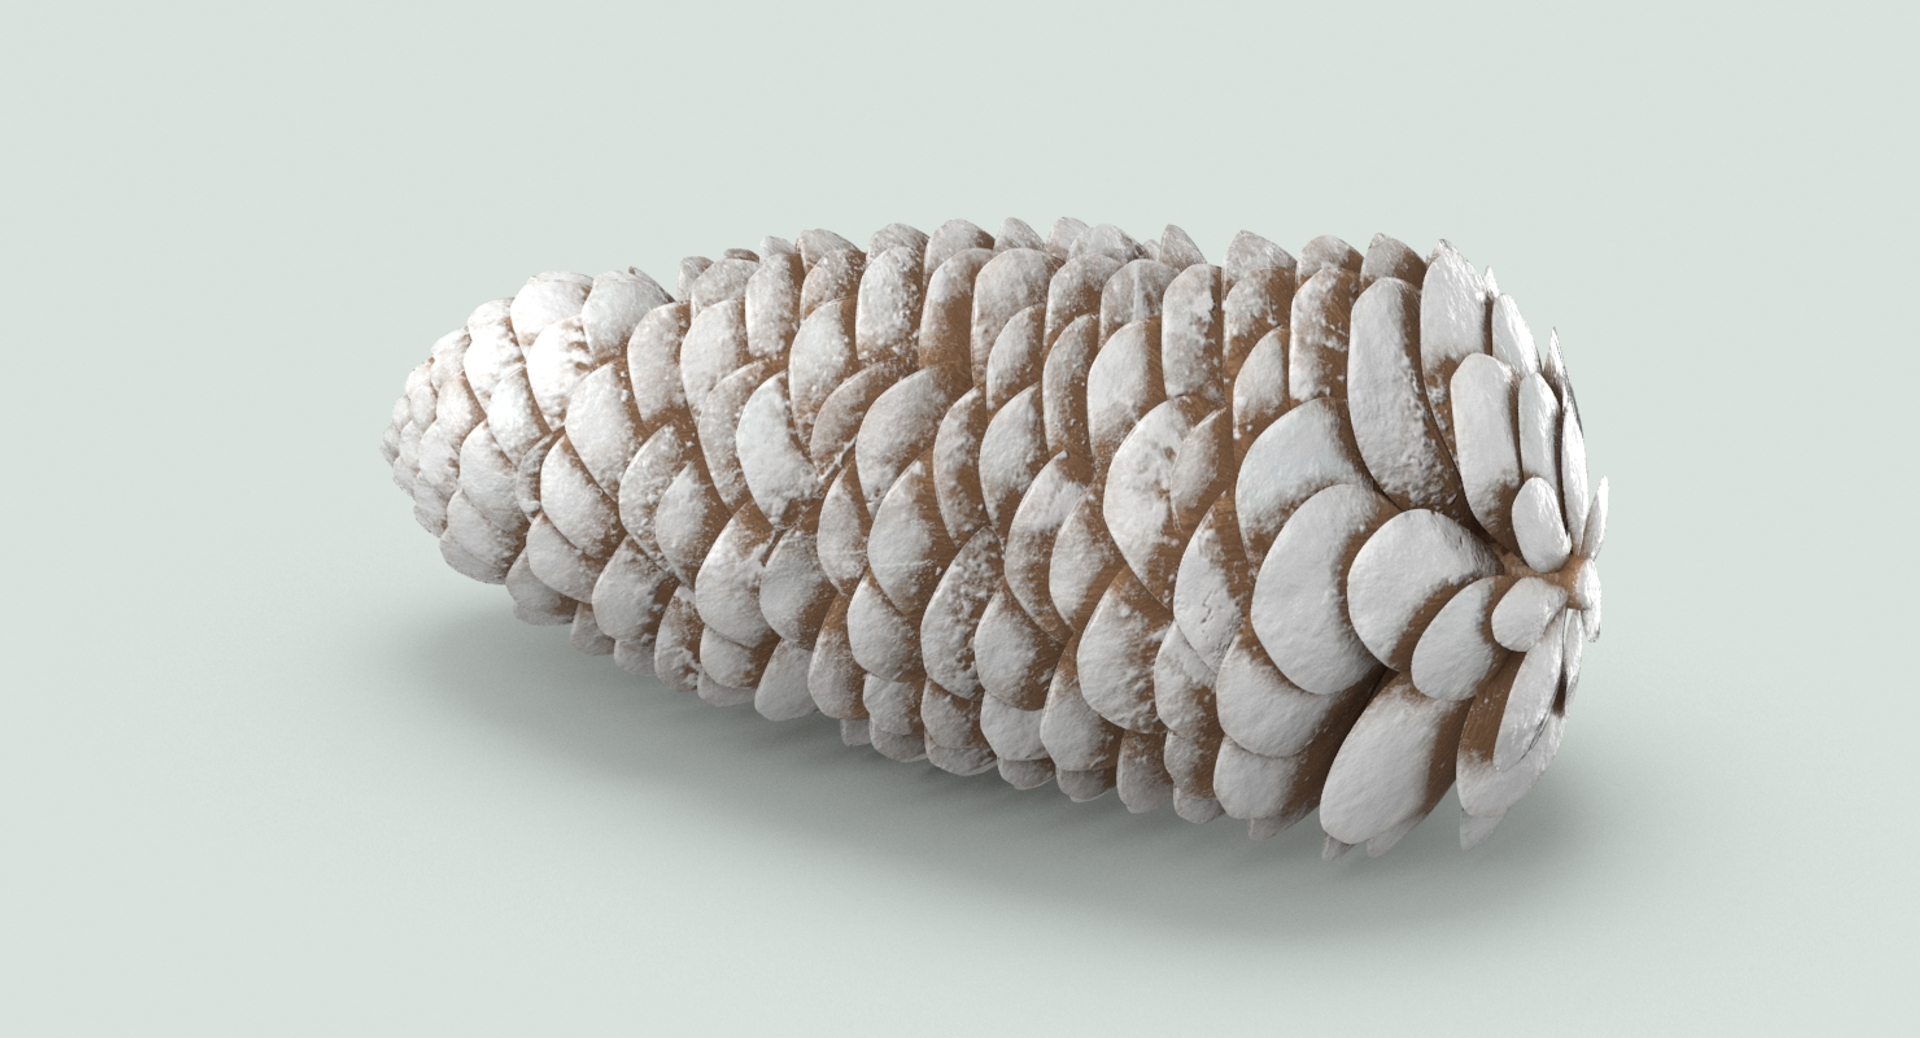 Frosted Pine Cones - 05 3D Model $29 - .usd .fbx .c4d .unitypackage .upk  .max .ma .obj .gltf - Free3D